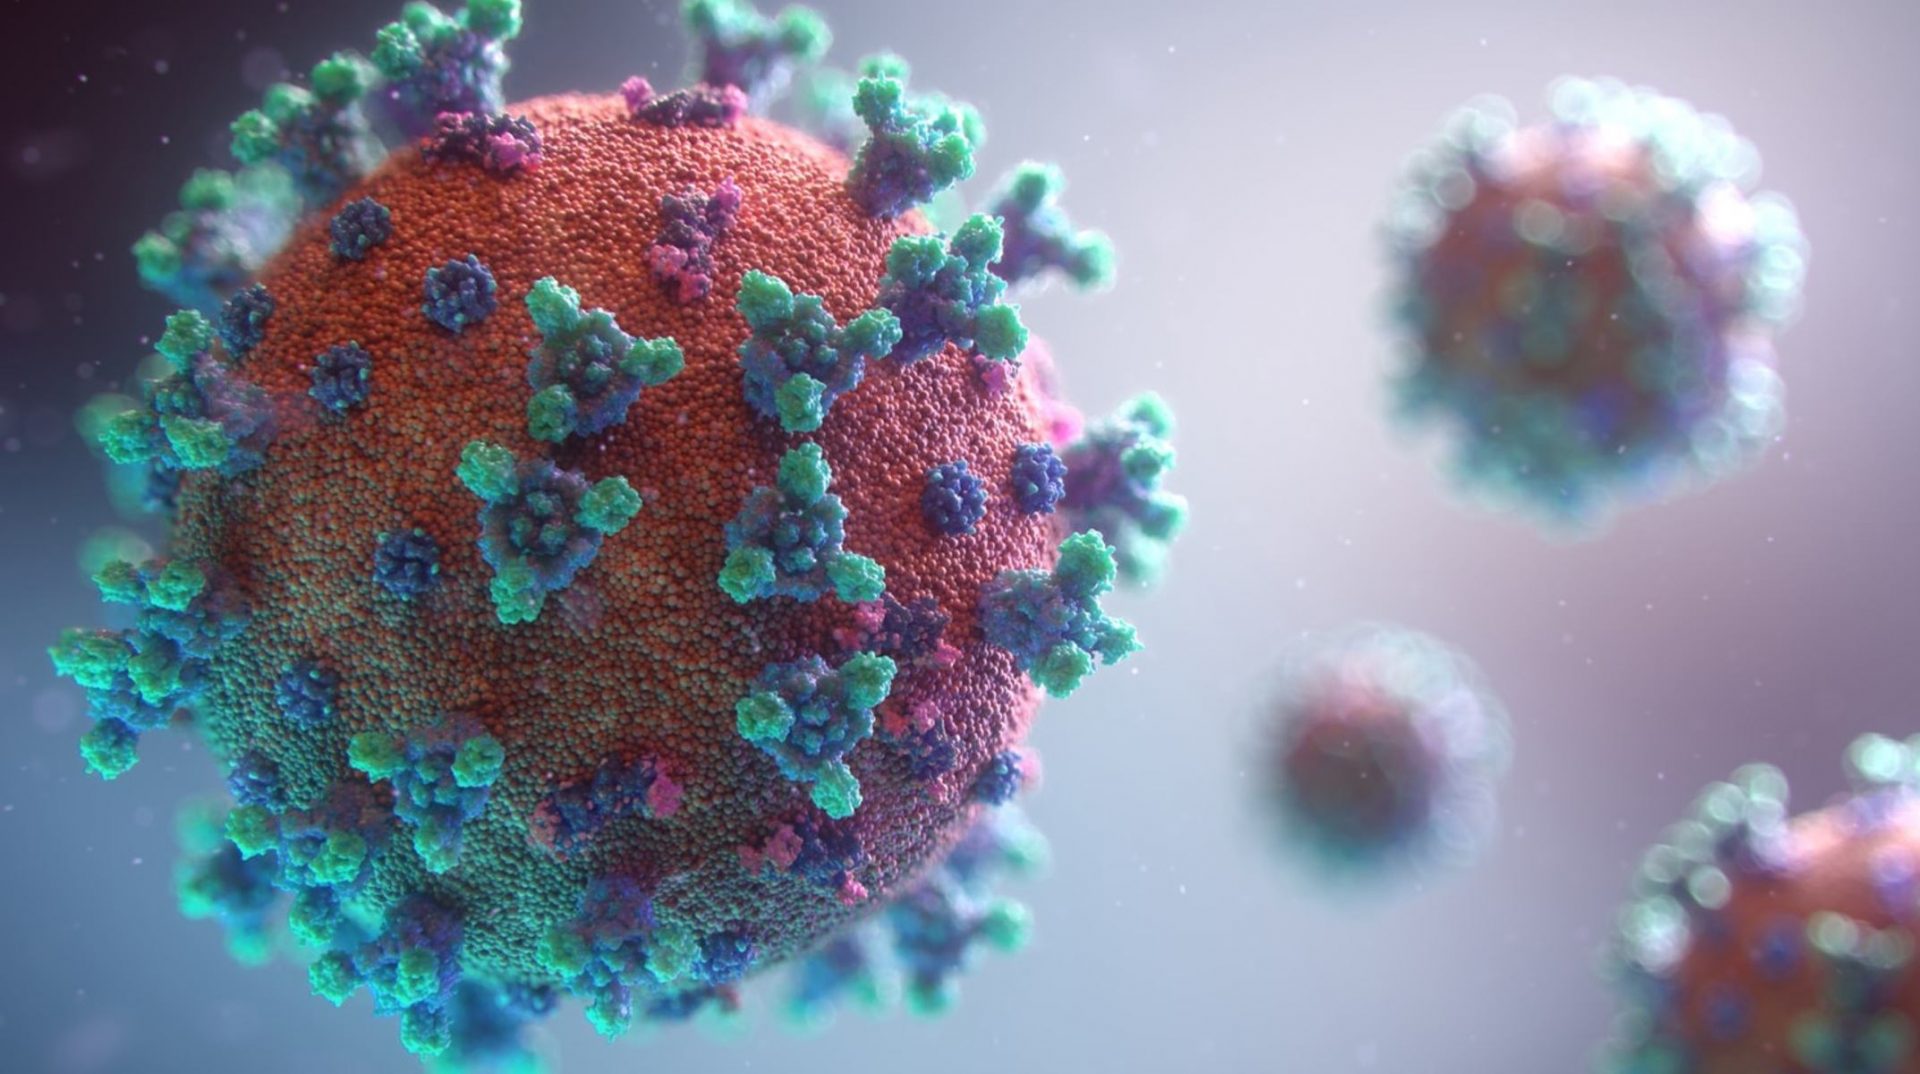 Microscopic view of the COVID-19 virus